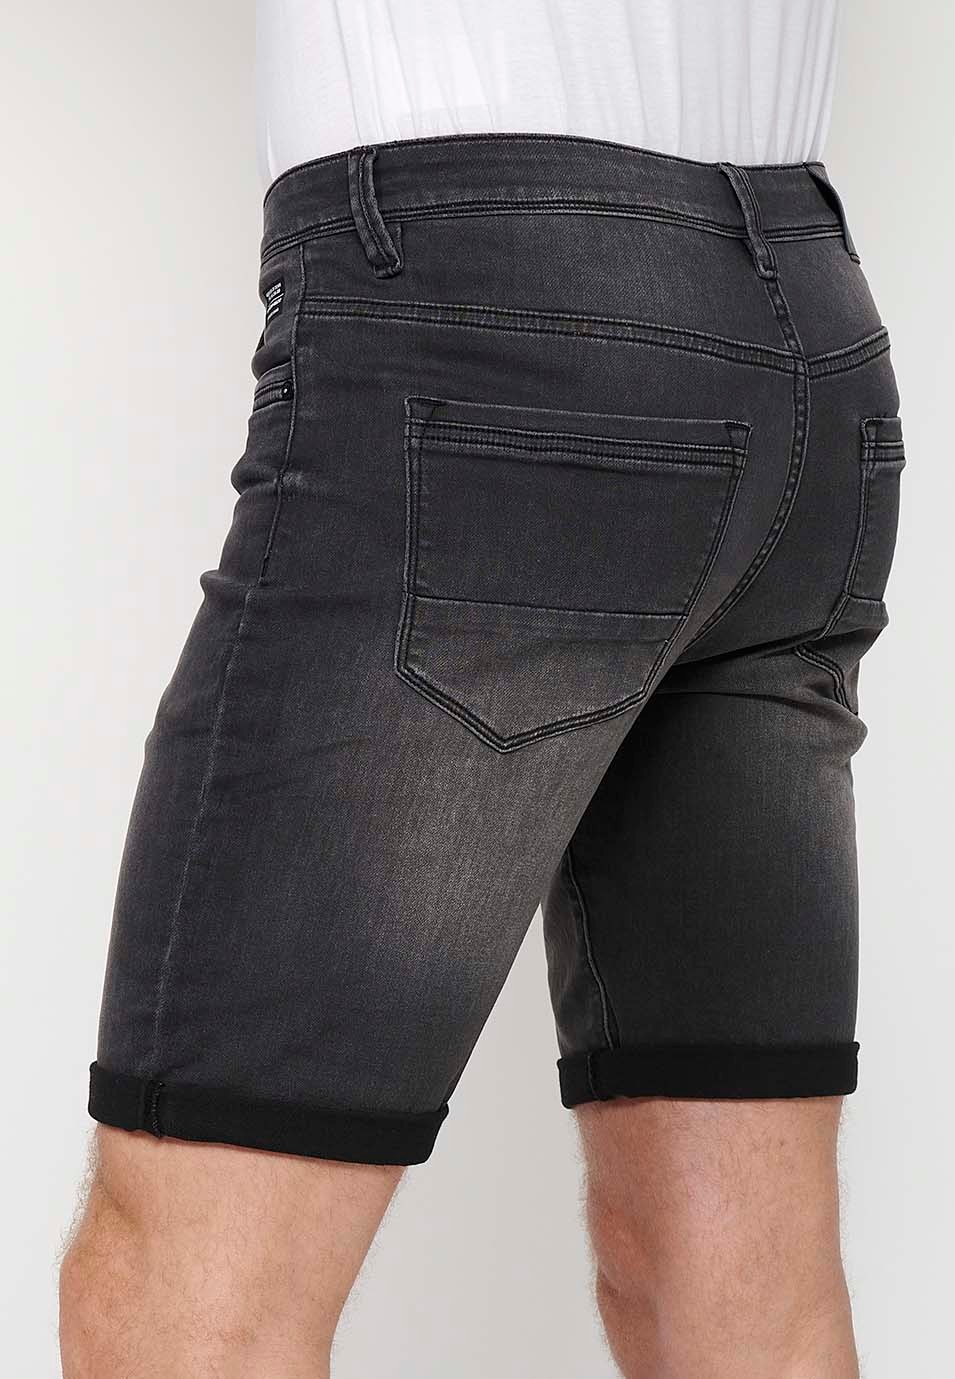 Shorts with turn-up finish with front closure with zipper and button in Black for Men 5